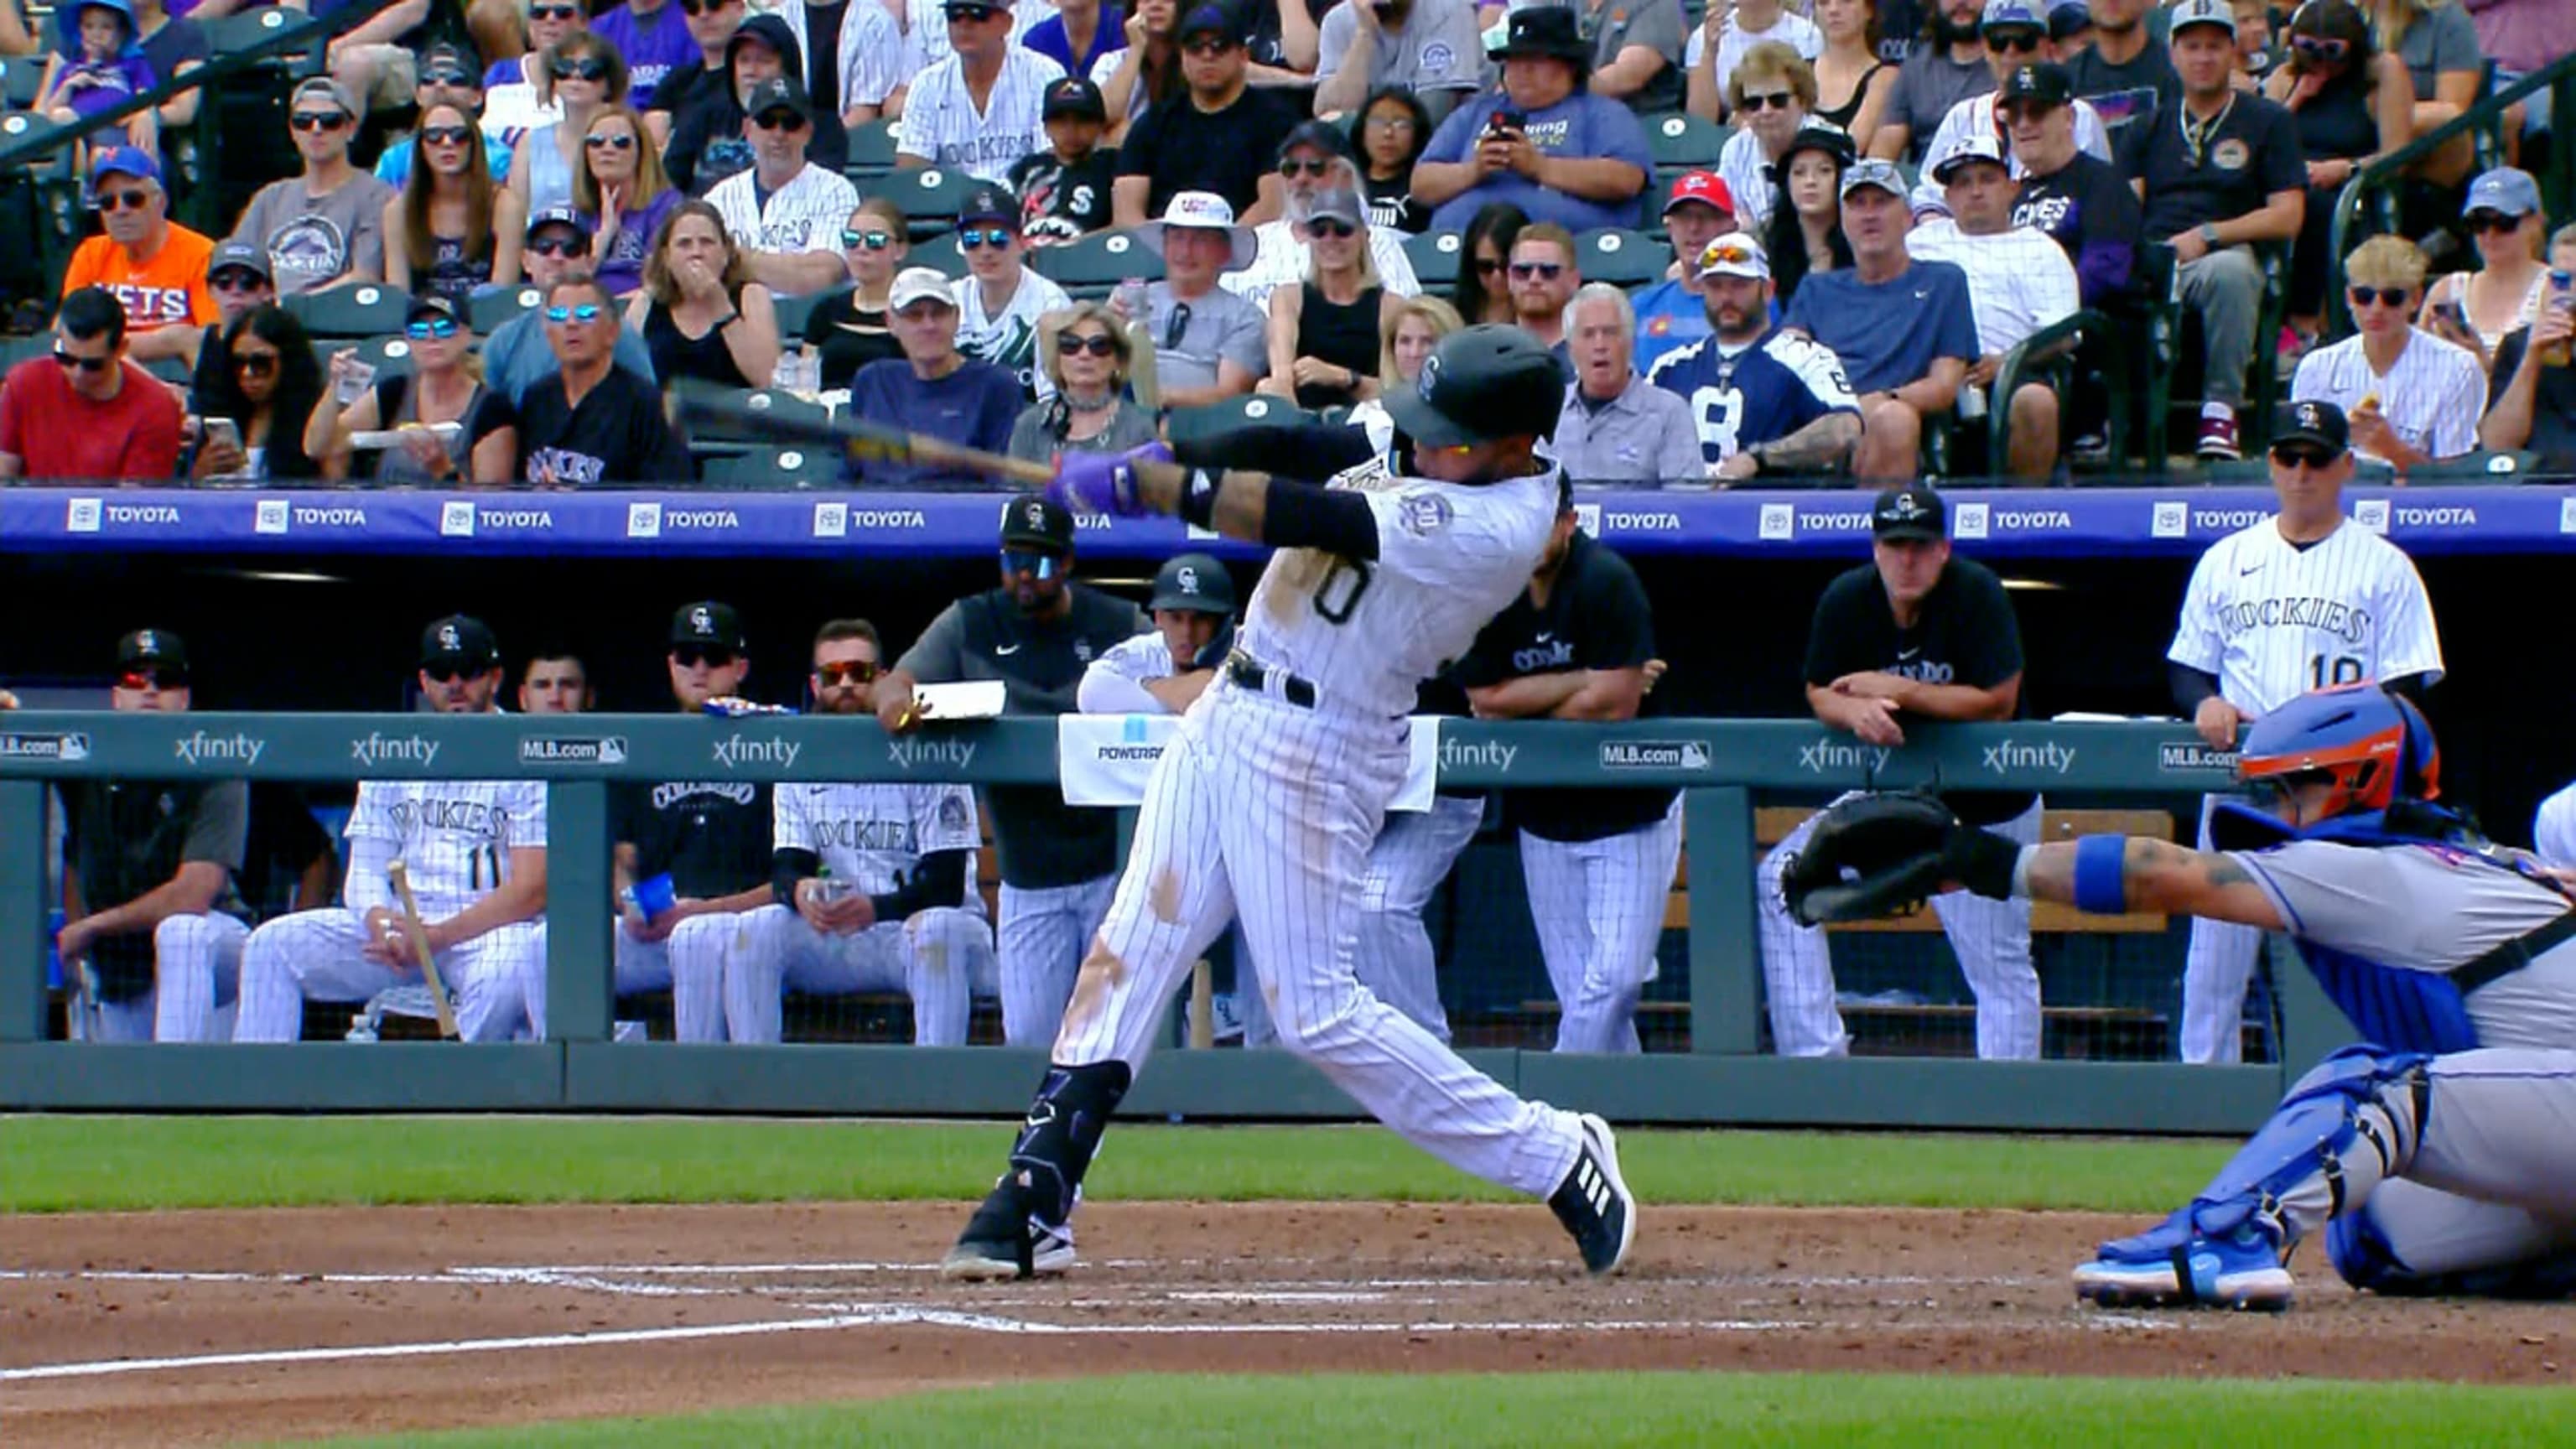 McMahon homers, drives in 5 as Rockies rally to beat Mets 11-10, take  series